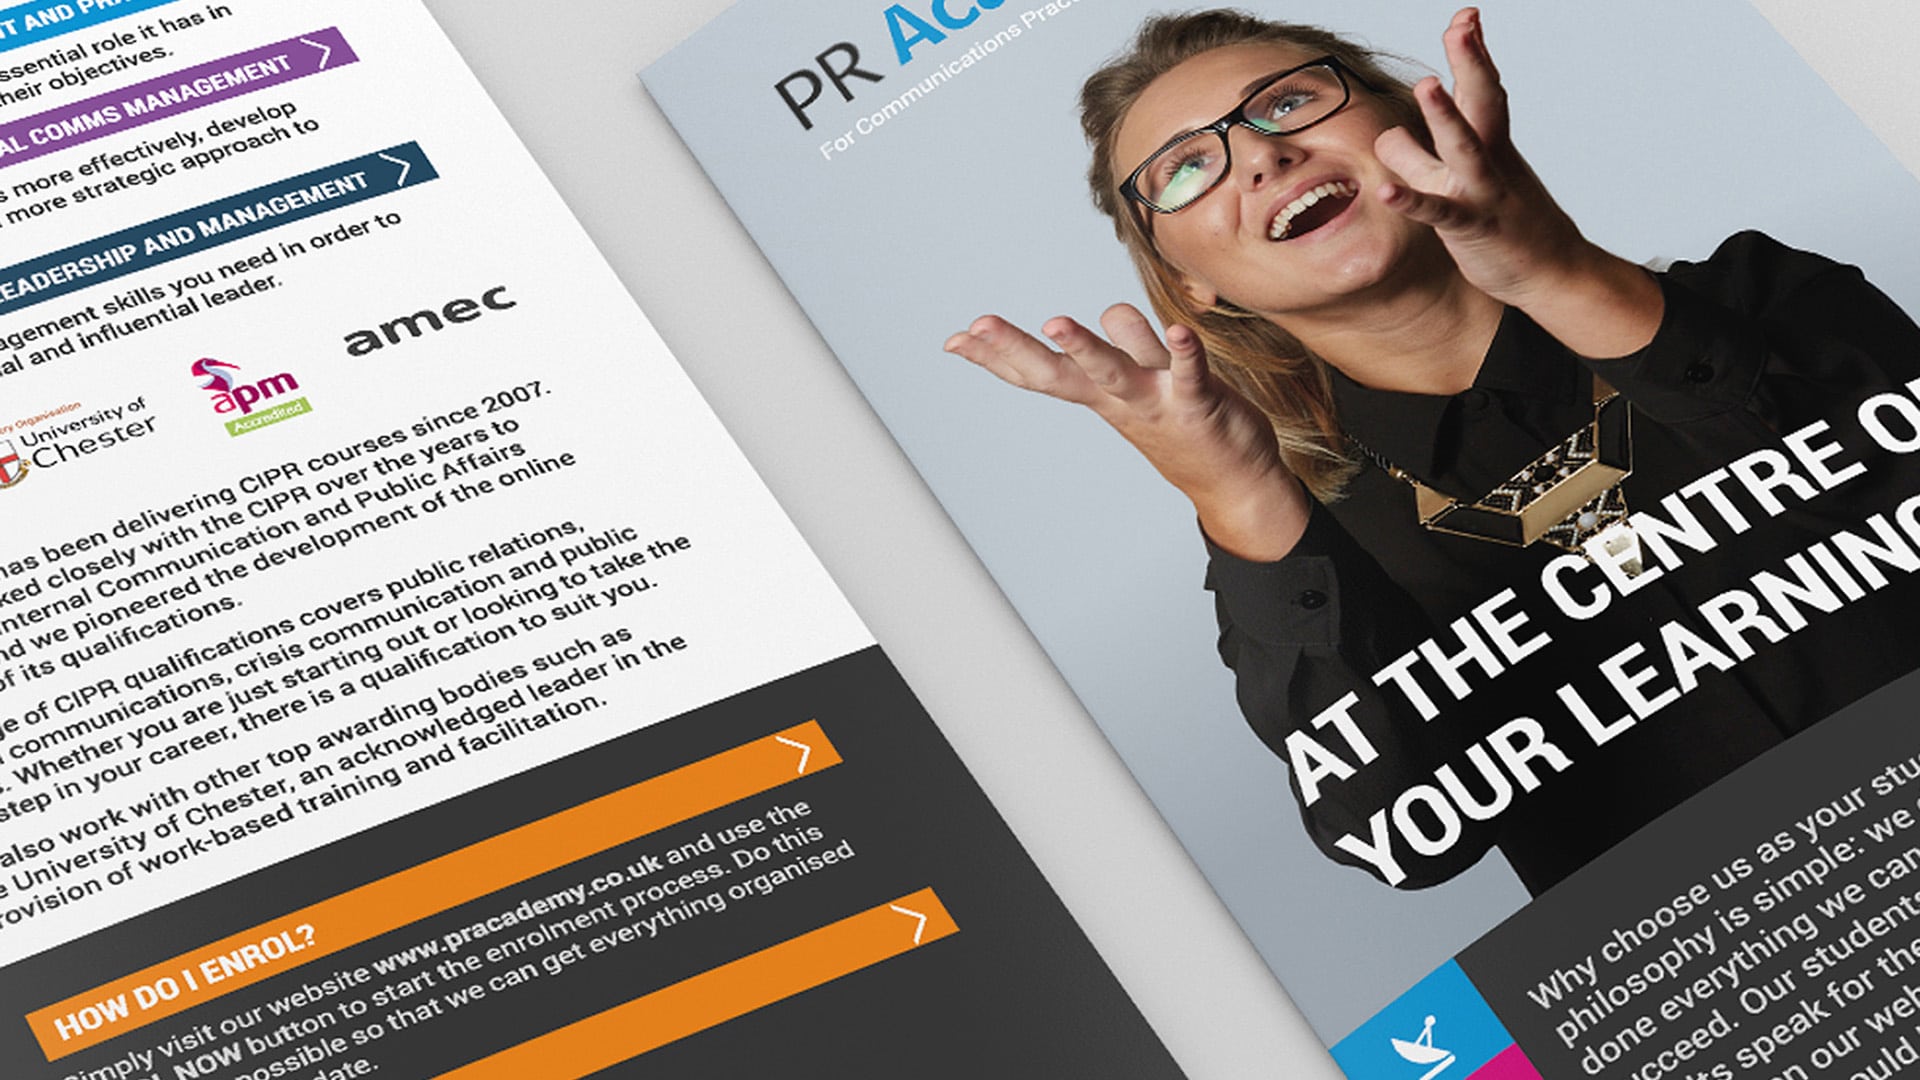 Two printed PR Academy Courses Brochures side by side on a grey surface